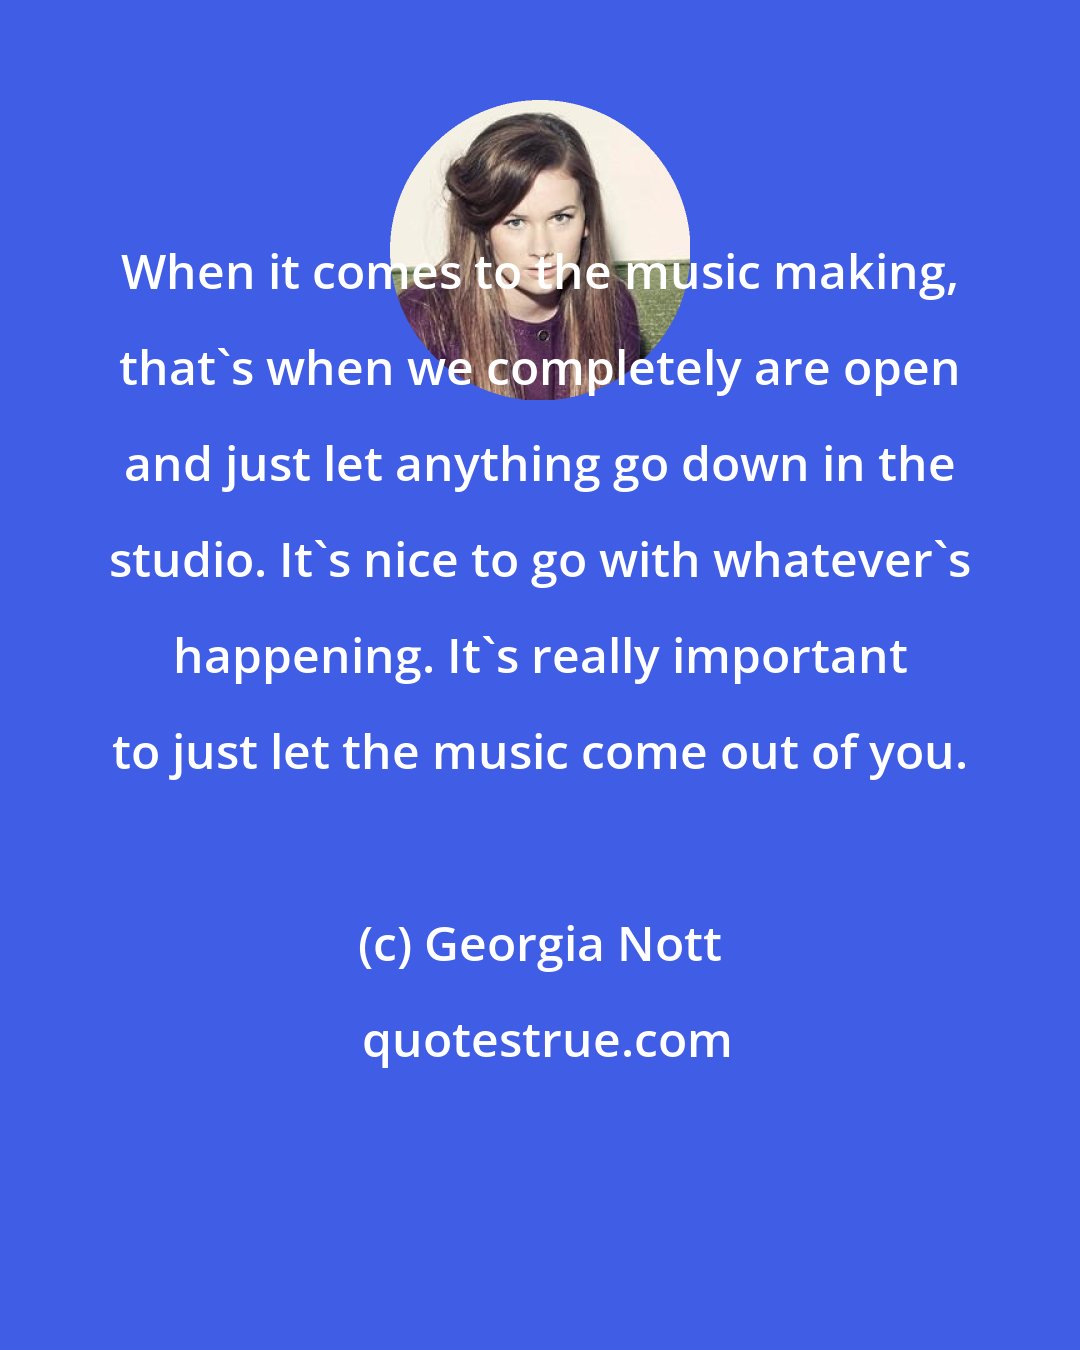 Georgia Nott: When it comes to the music making, that's when we completely are open and just let anything go down in the studio. It's nice to go with whatever's happening. It's really important to just let the music come out of you.